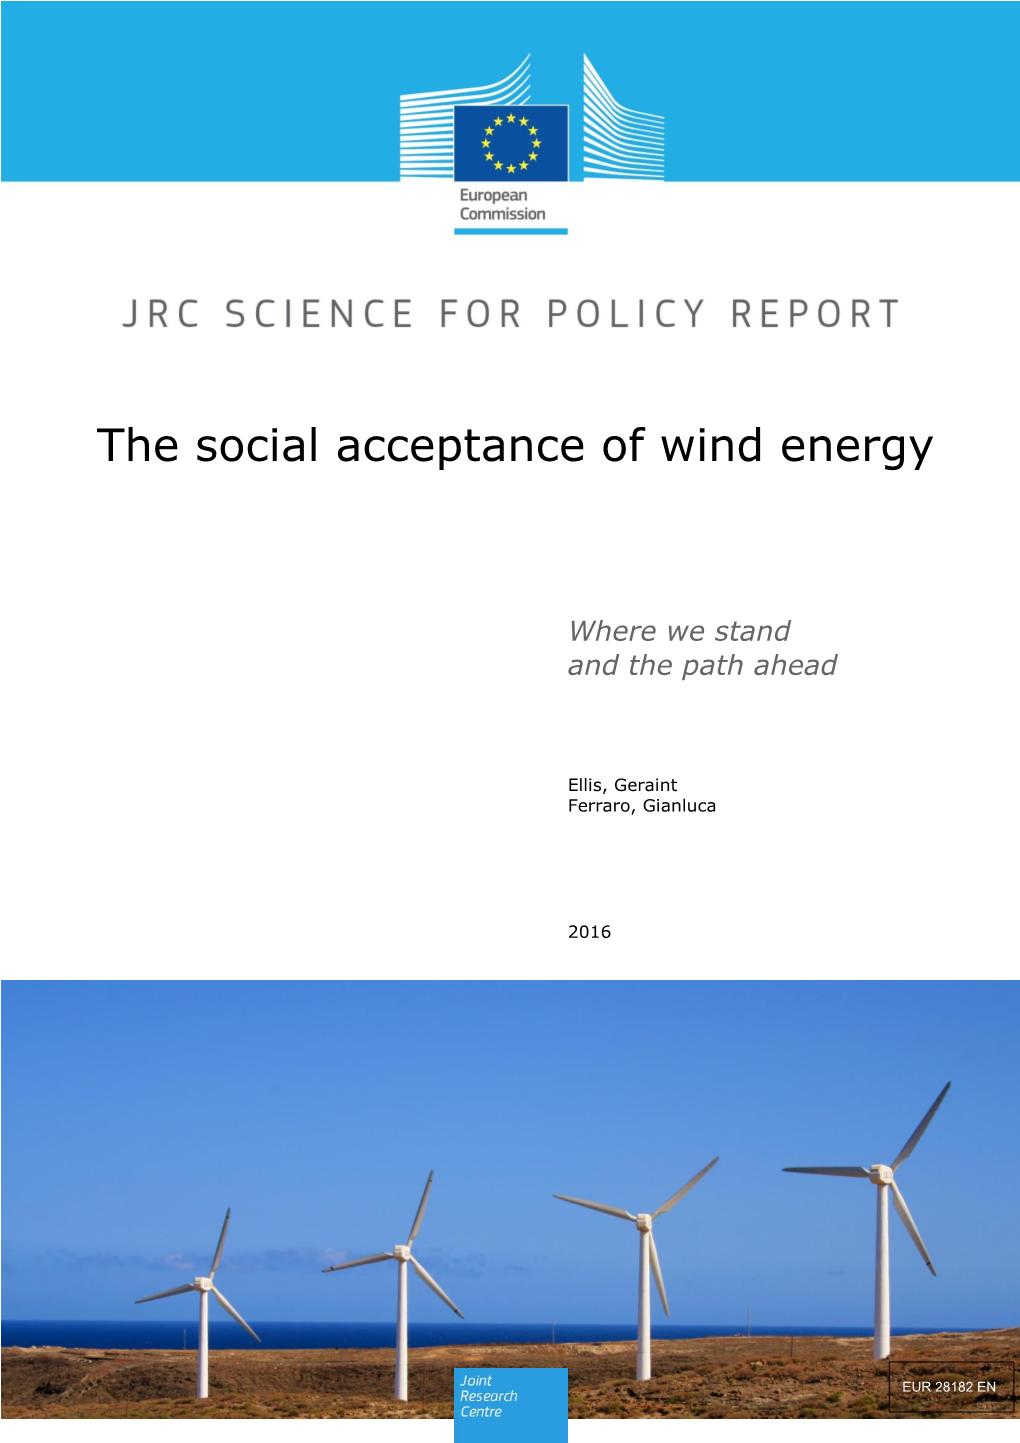 The Social Acceptance of Wind Energy